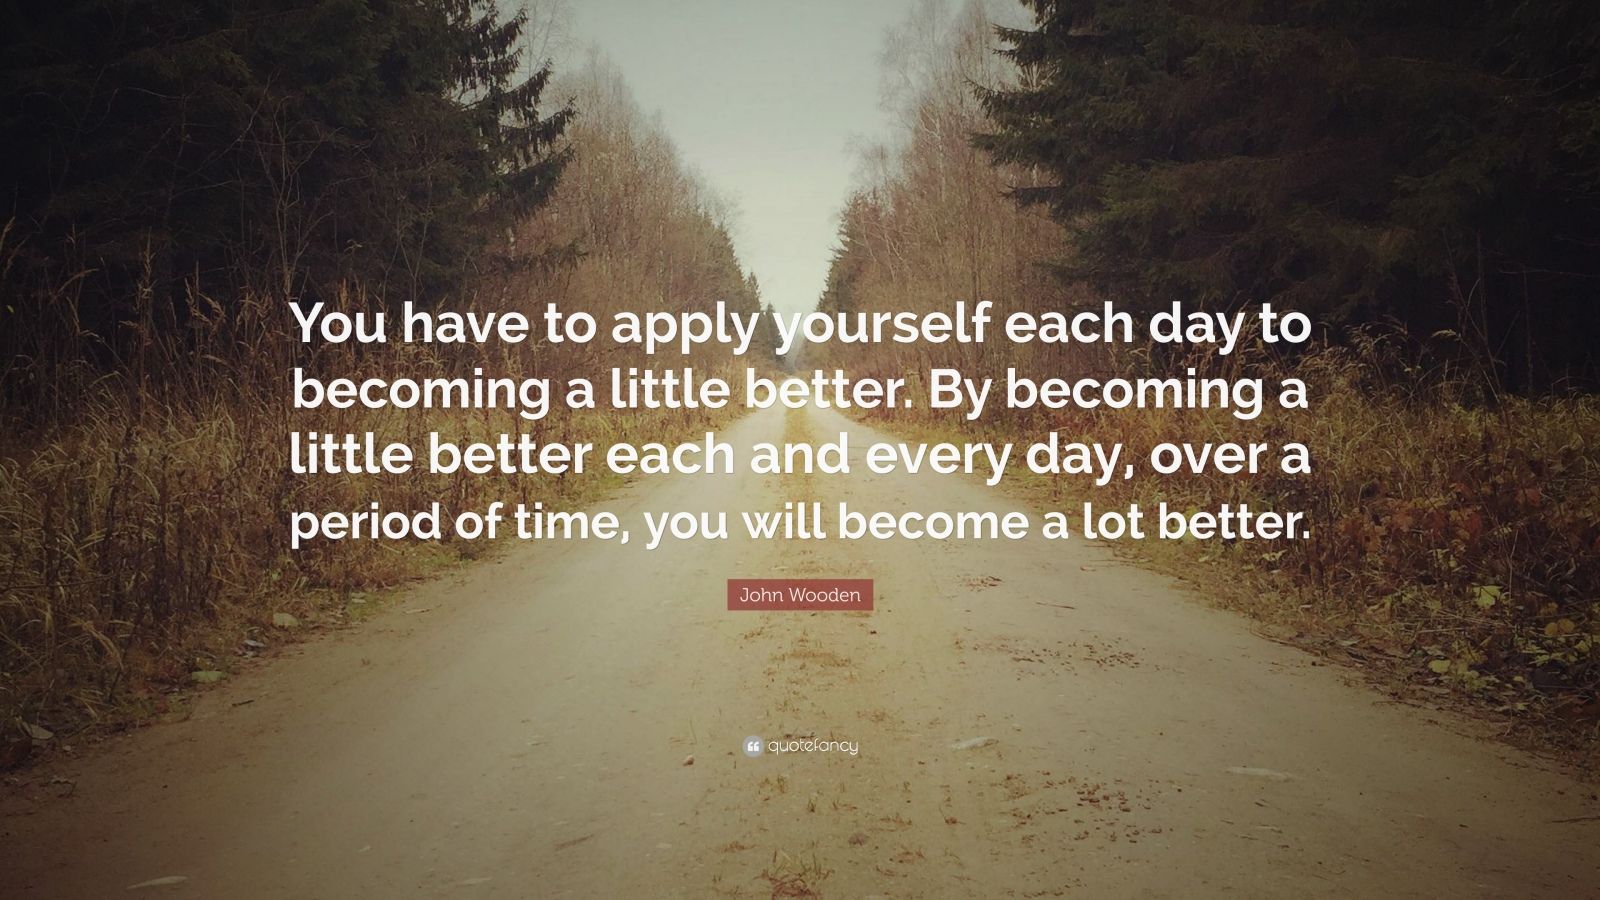 John Wooden Quote: “You have to apply yourself each day to becoming a